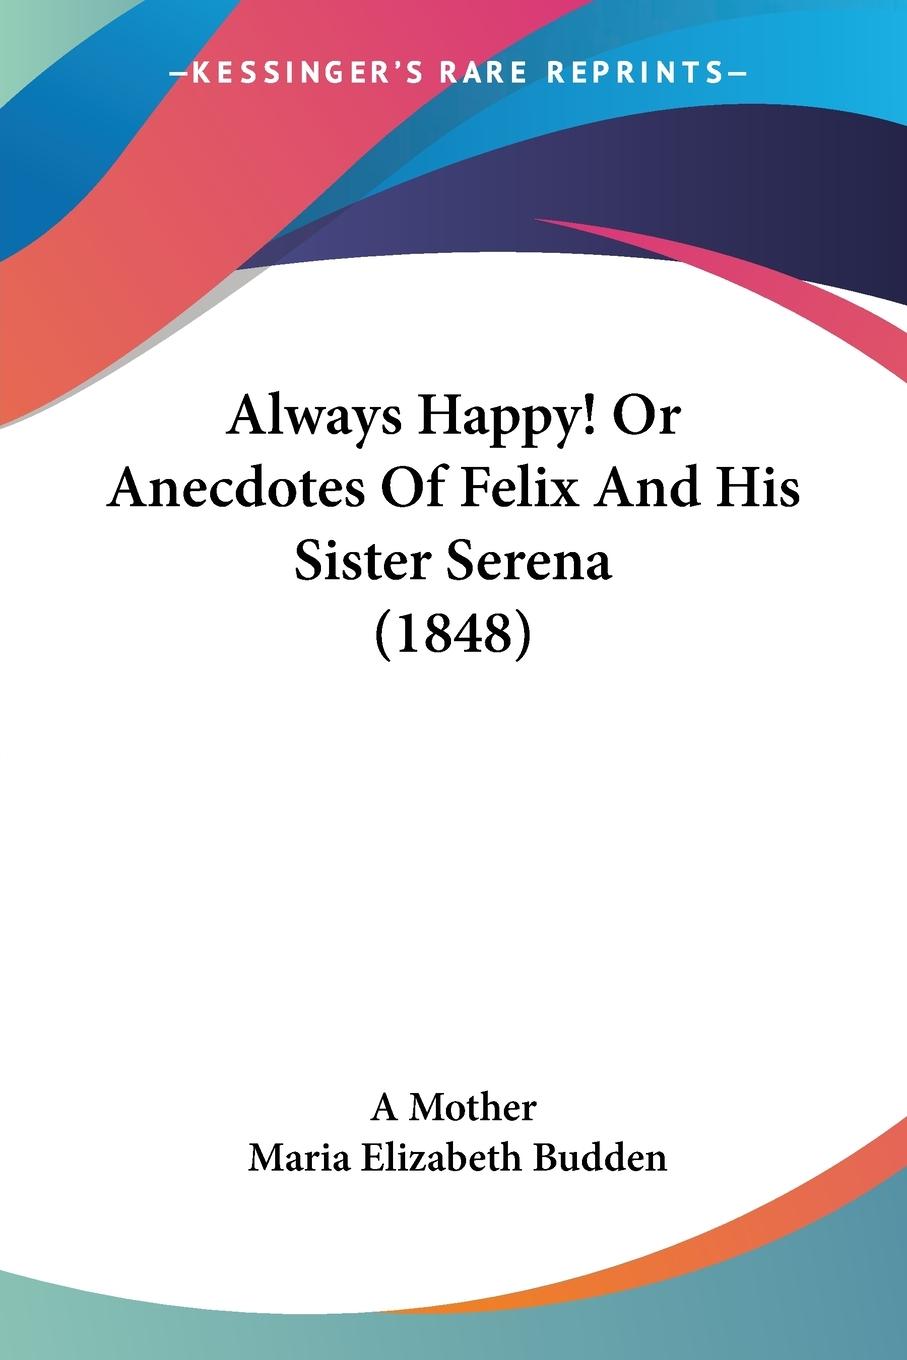 Always Happy! Or Anecdotes Of Felix And His Sister Serena (1848) - A Mother Budden, Maria Elizabeth